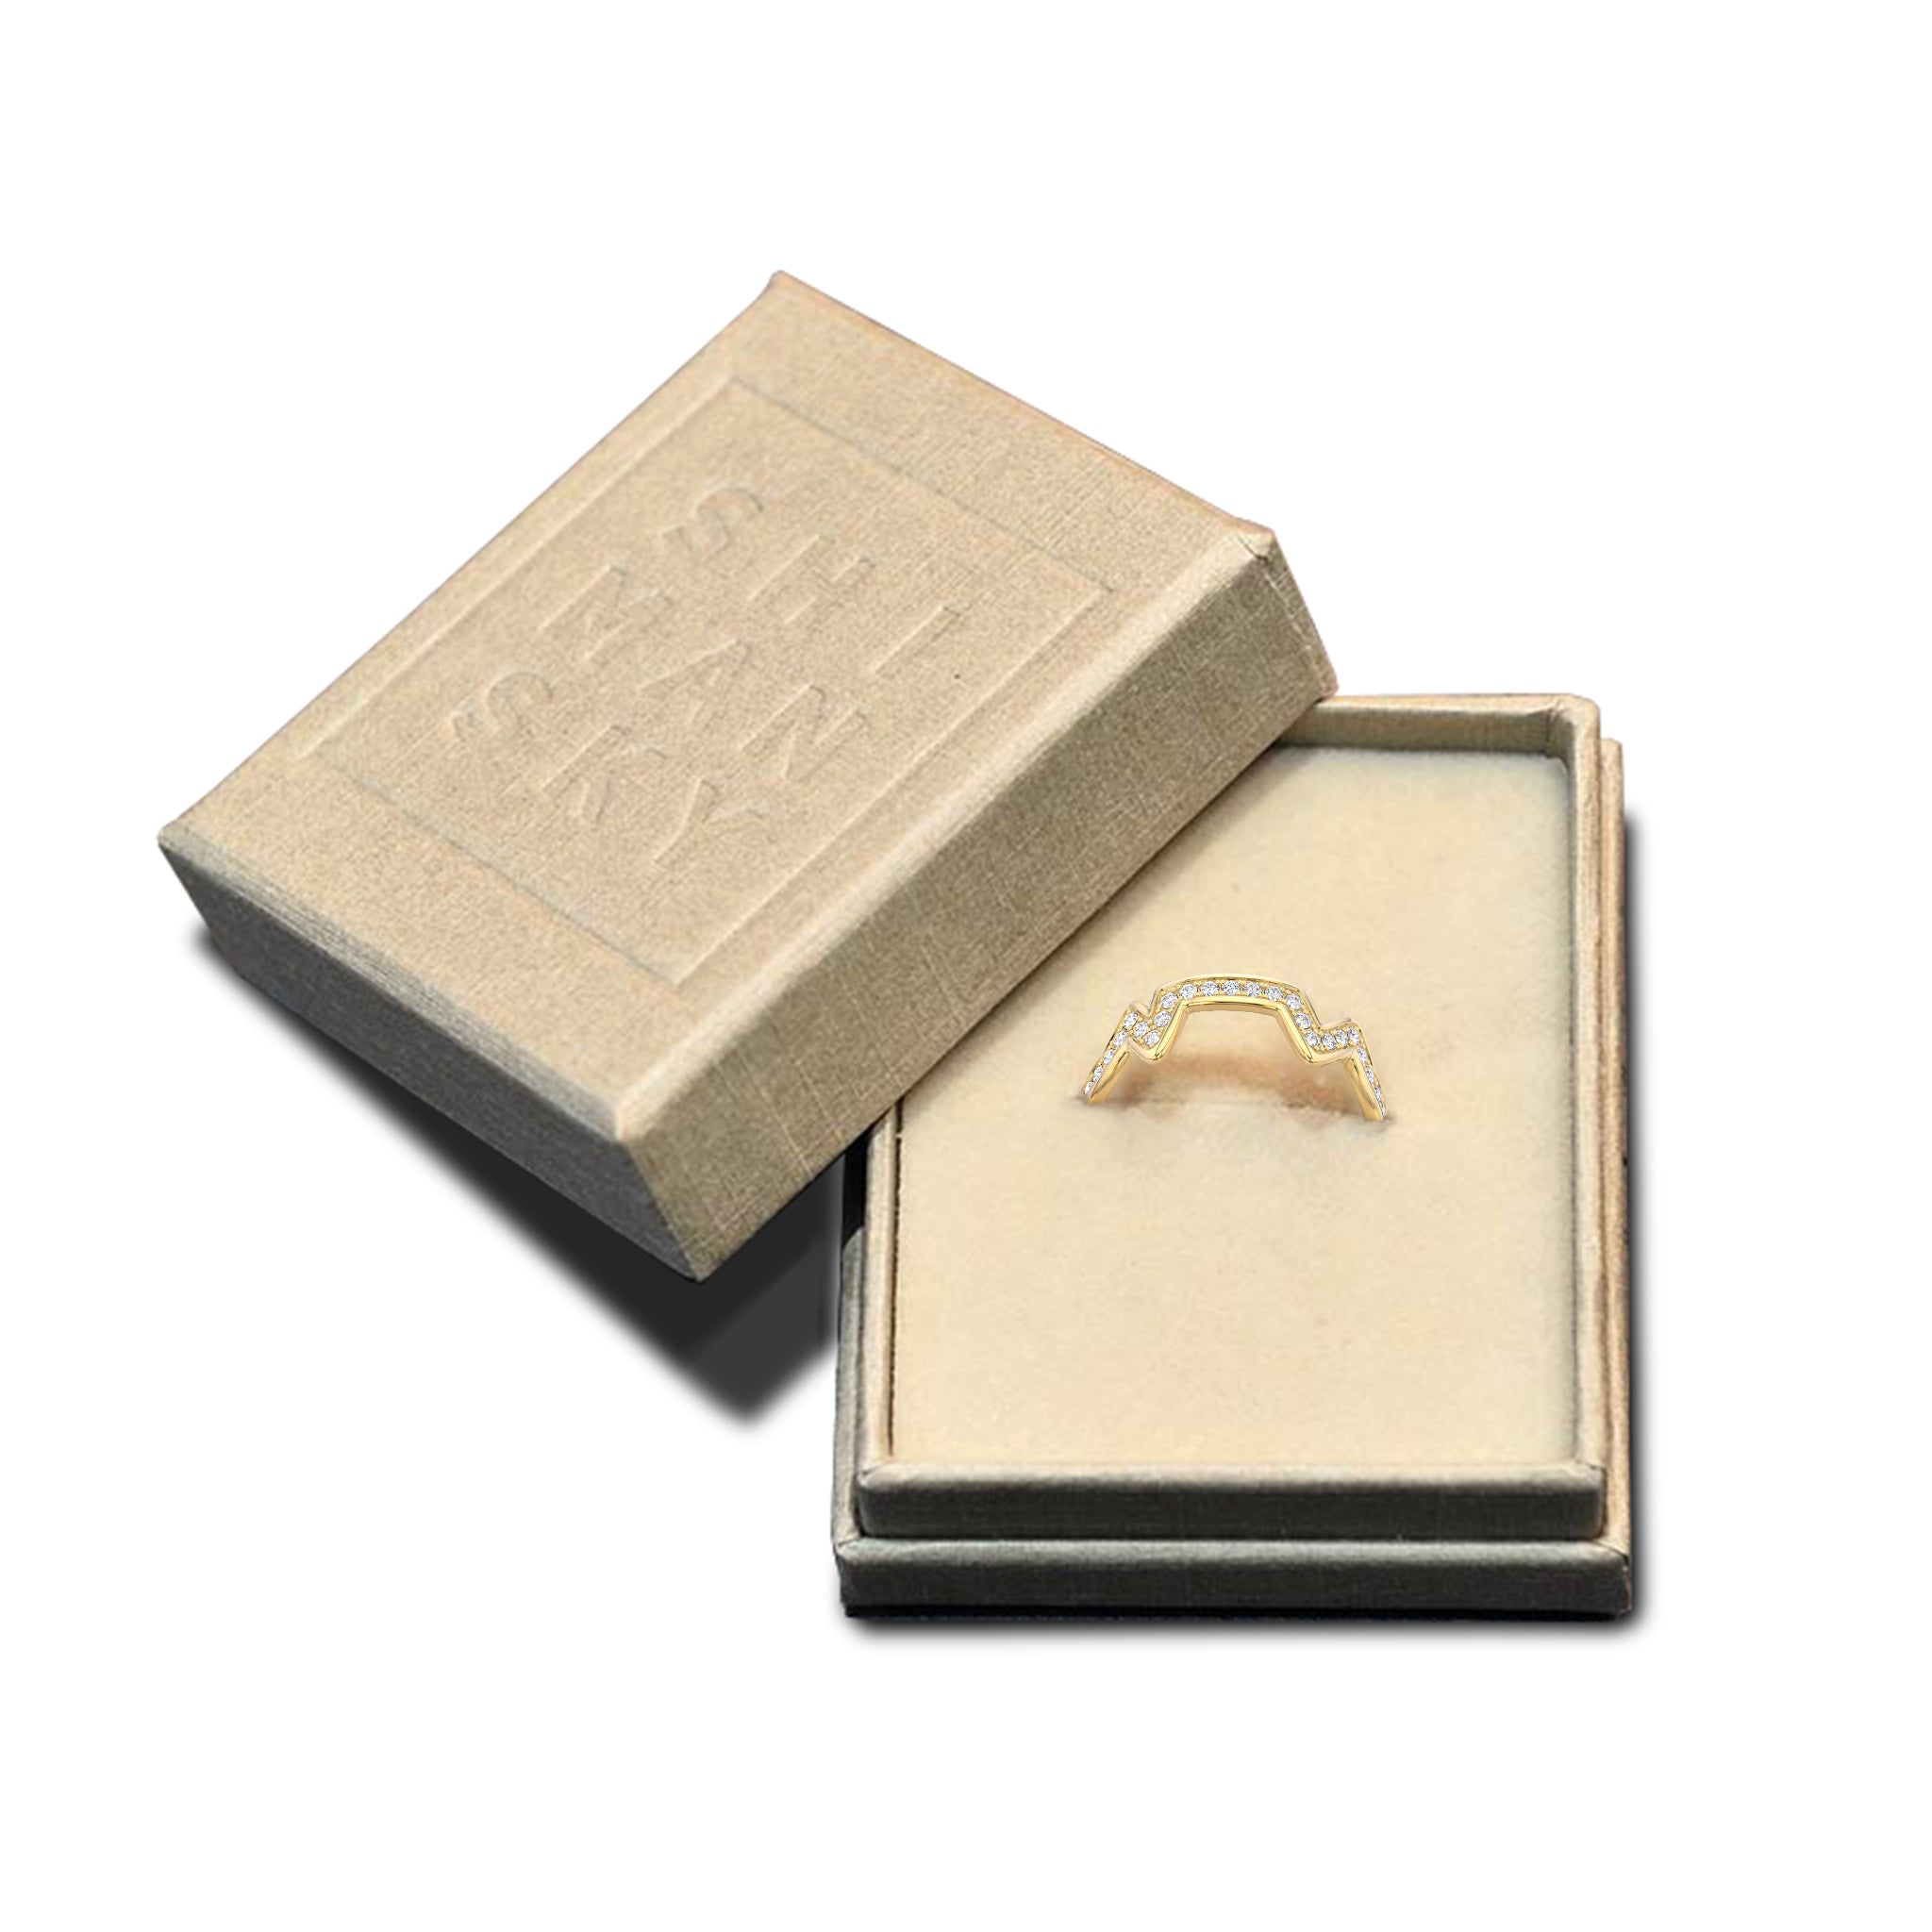 Shimansky - Table Mountain Pave Diamond Ring Crafted in 14K Yellow Gold